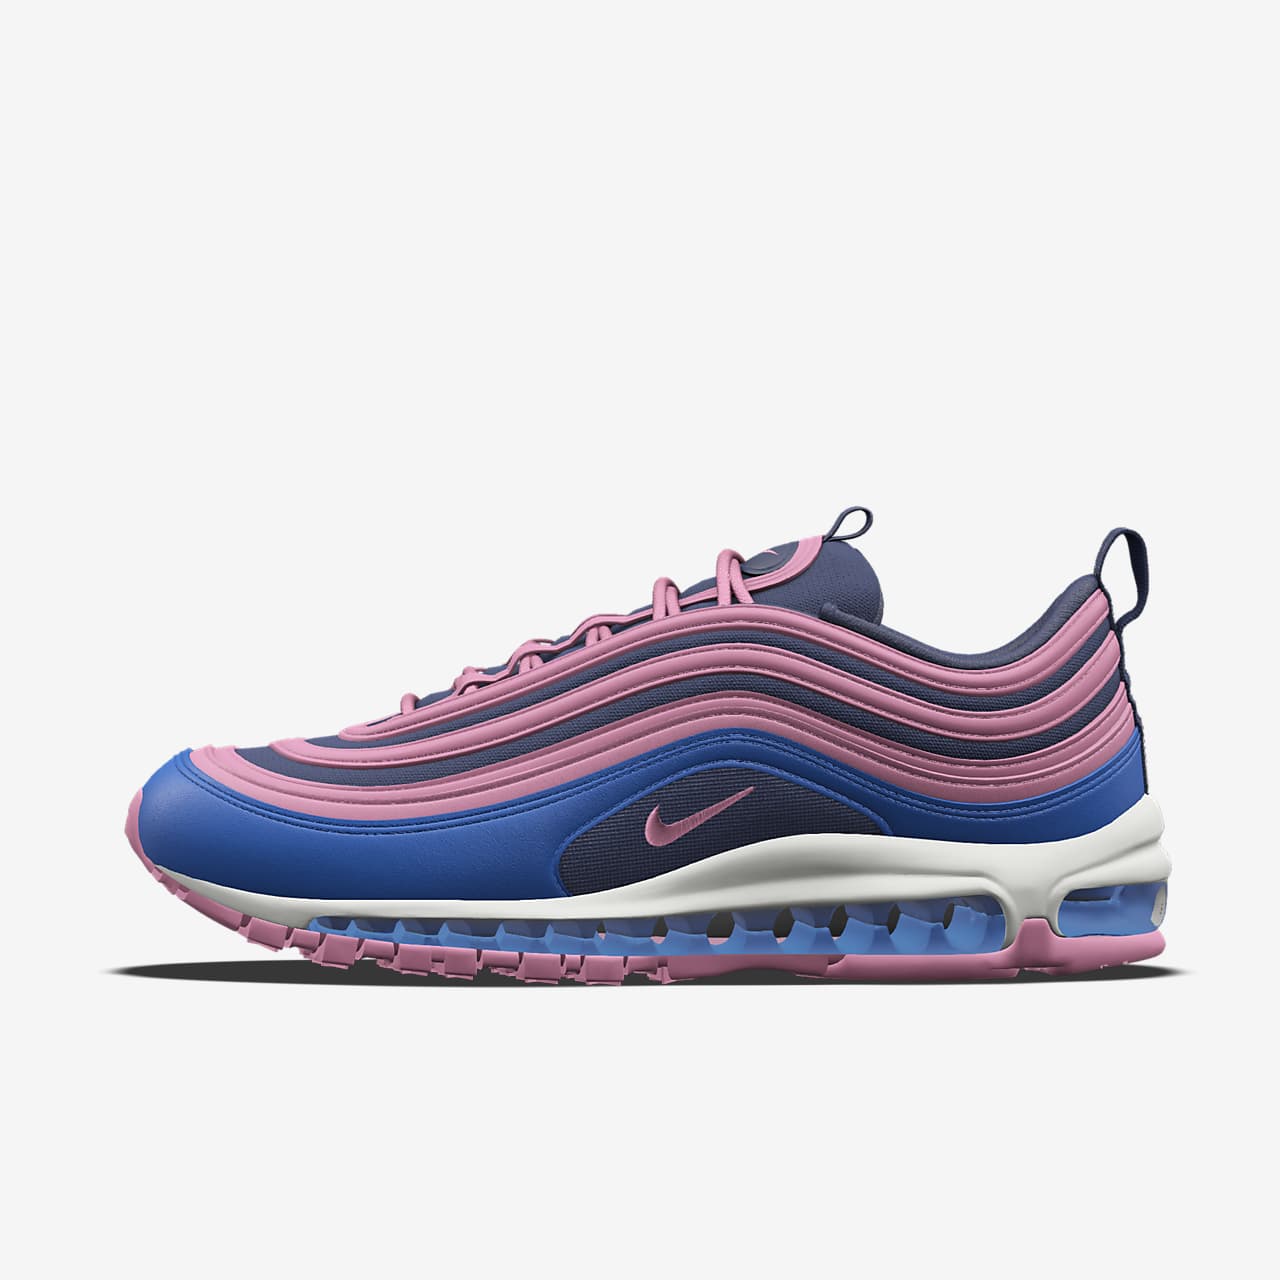 Chaussure personnalisable Nike Air Max 97 By You pour femme